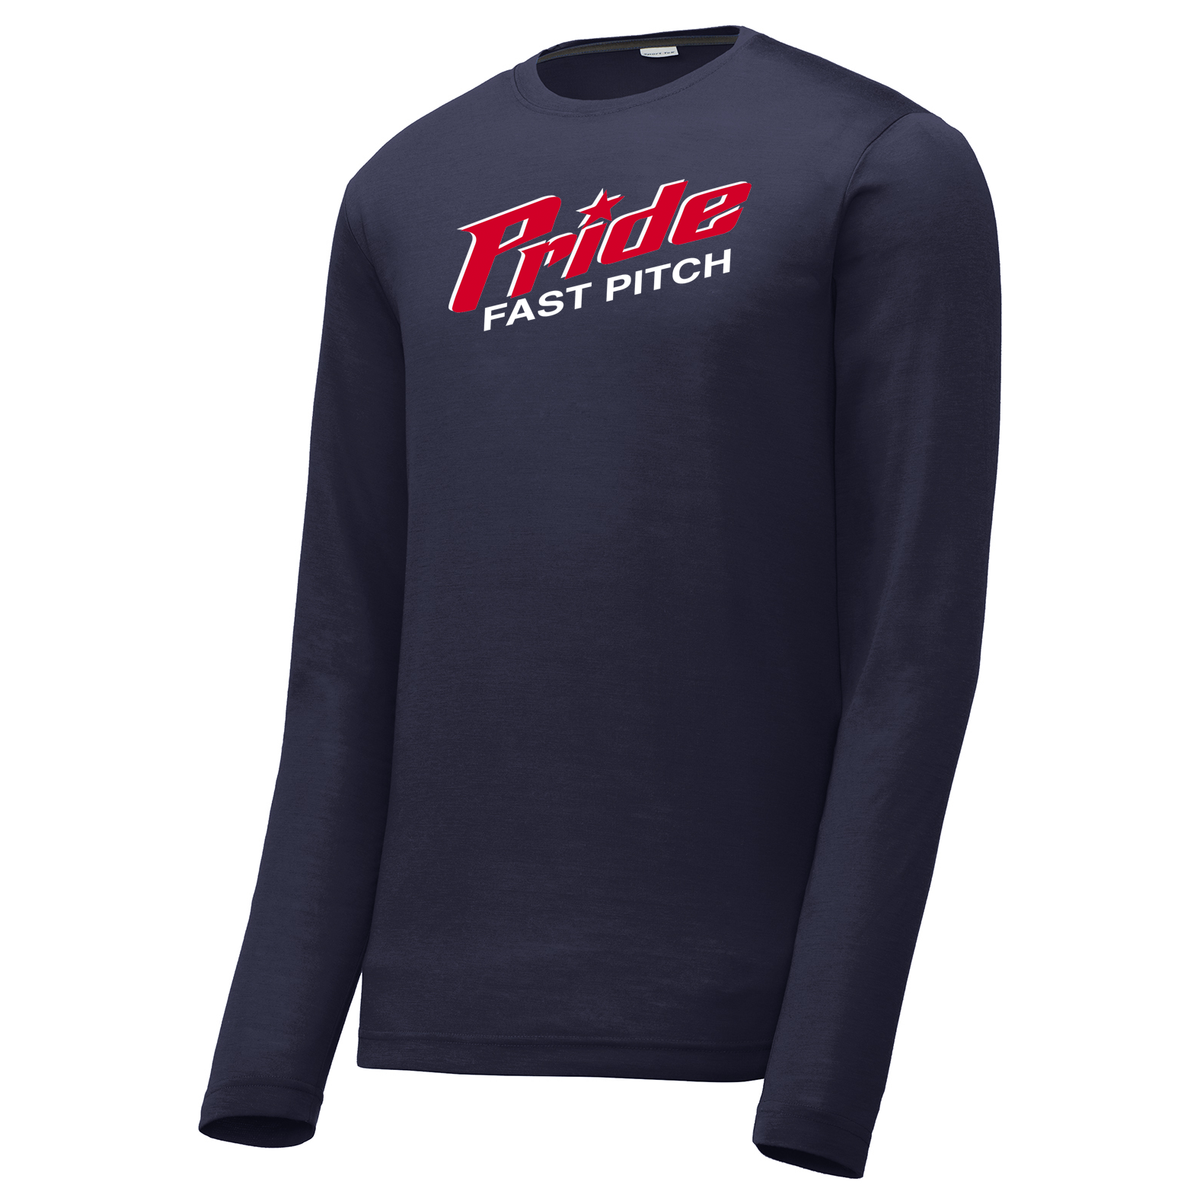 Long Island Pride Fastpitch Long Sleeve CottonTouch Performance Shirt